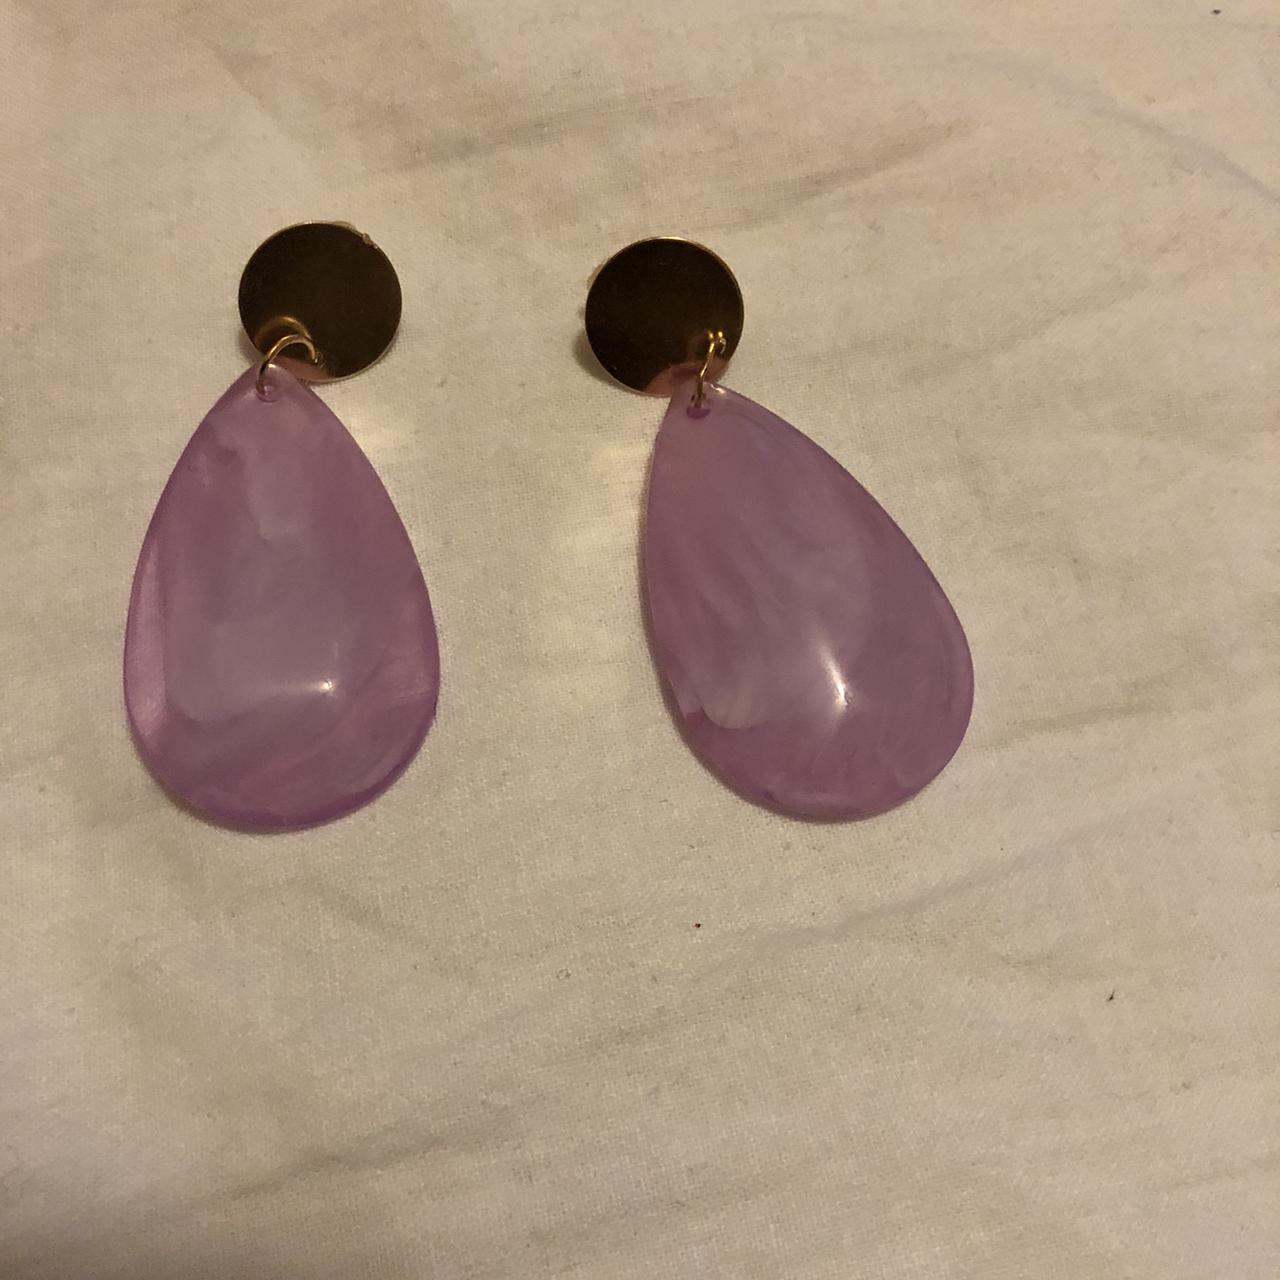 Product Image 4 - Pink glass earrings